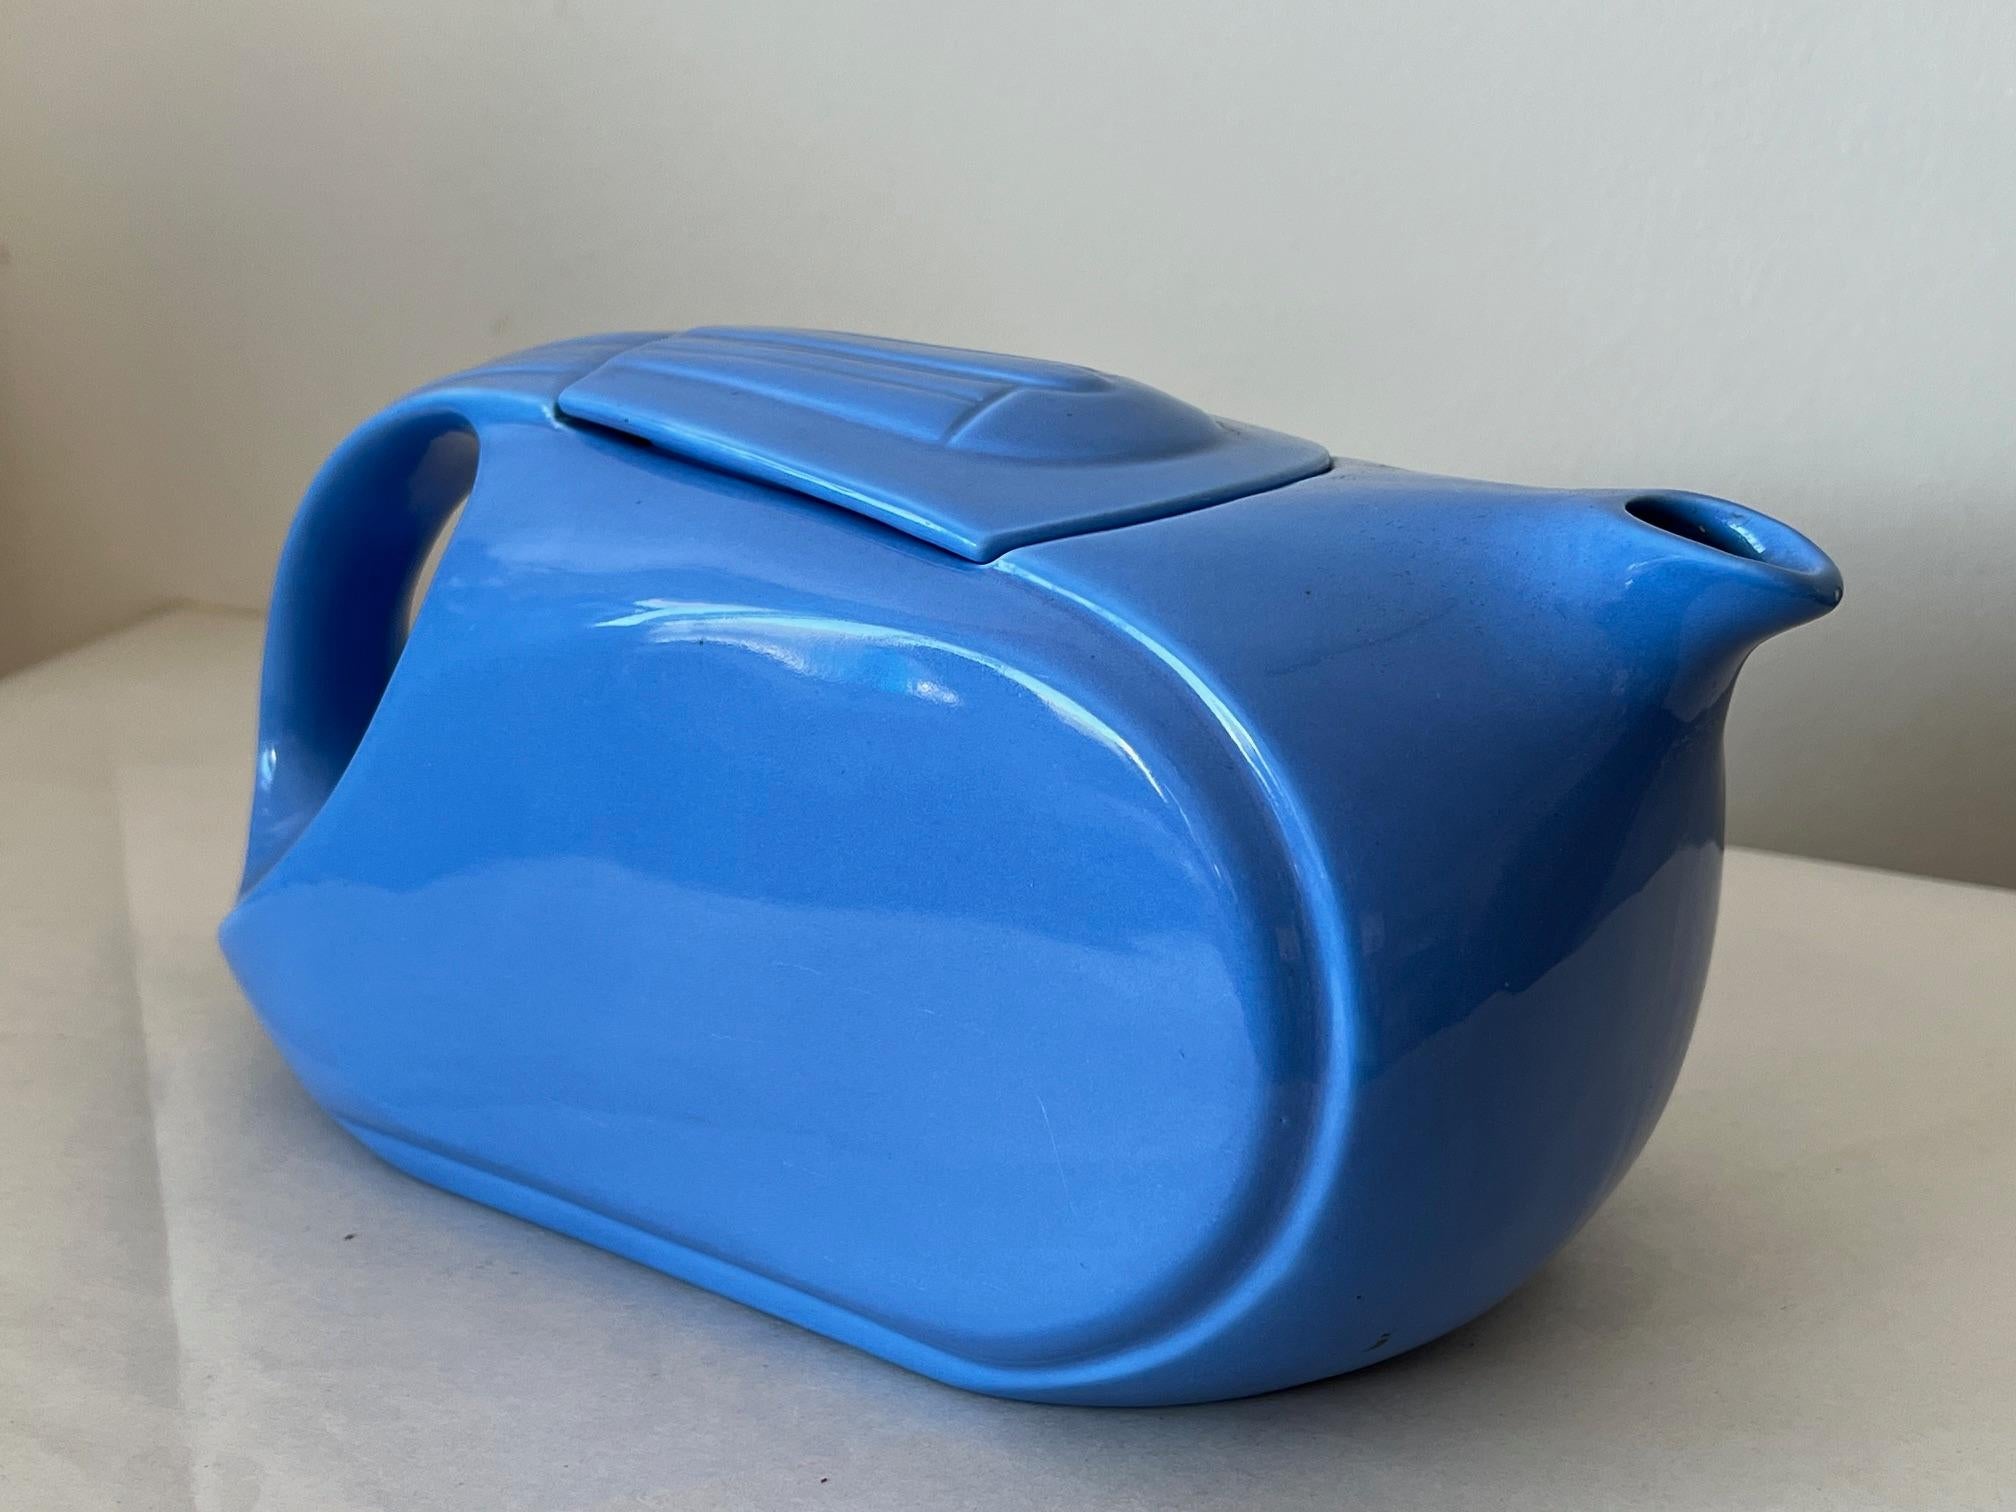 An Art Deco  Hall China blue glazed earthenware lidded refrigerator pitcher made for Westinghouse, which was a leading manufacturer of refrigerators in the 1930's. The pitcher is streamlined with elegant yet simple clean lines and is decorated in a